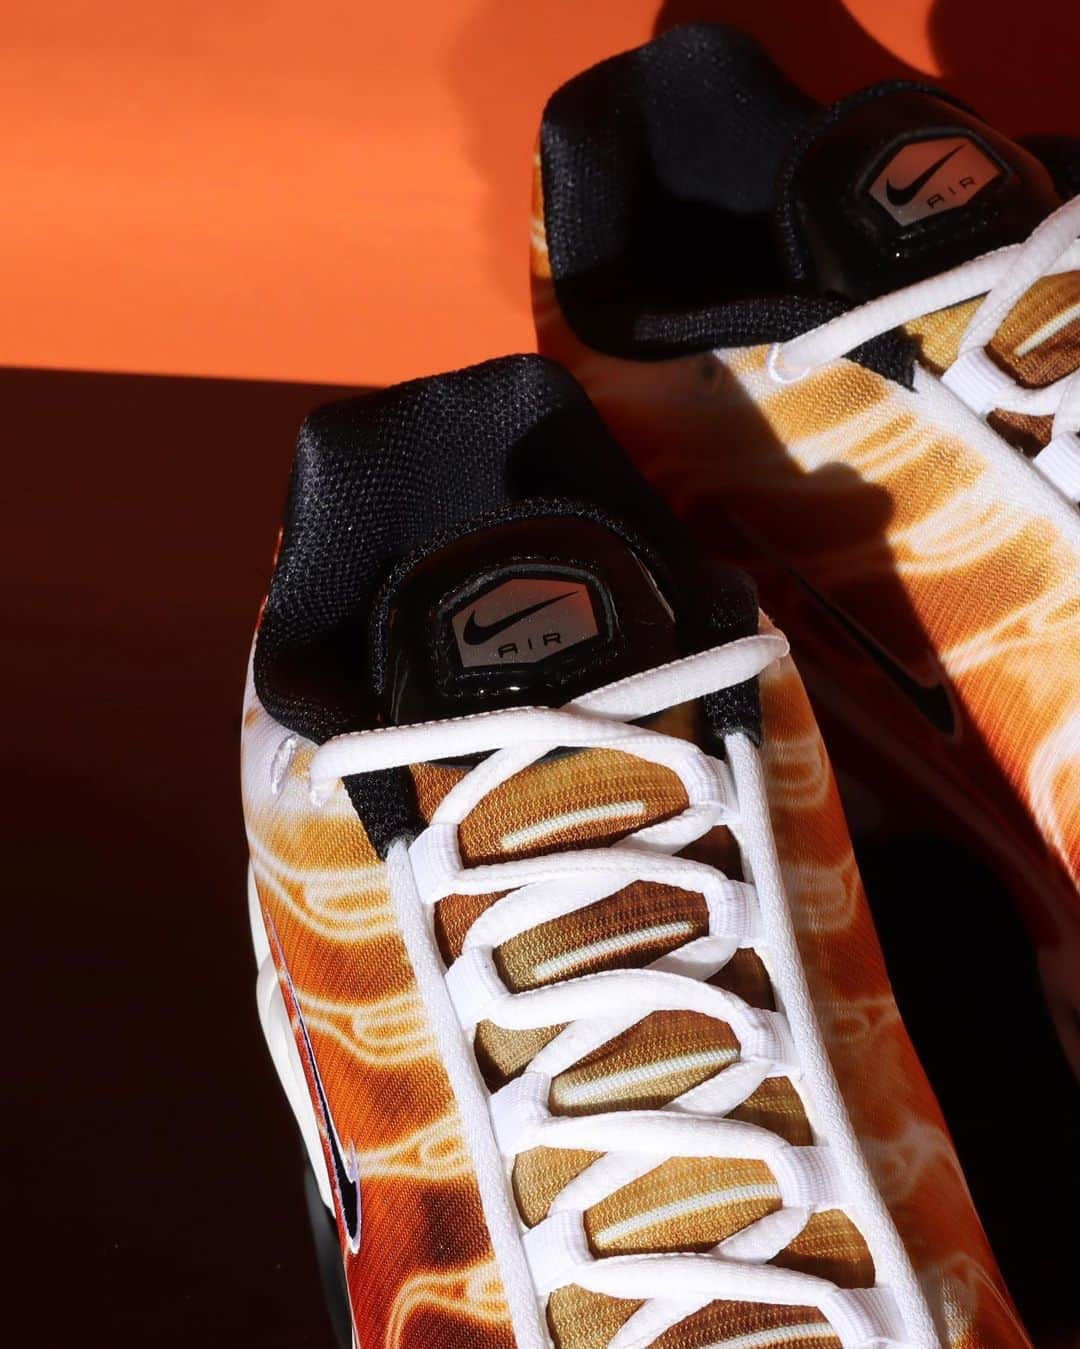 アトモスさんのインスタグラム写真 - (アトモスInstagram)「.  NIKE AIR MAX PLUS OG “Light Photography”  通気性に優れたメッシュが涼しさを保ちながら、炎のようなケージがストリートに熱気をもたらす。ナイキ エア マックス プラスは、チューニングされたNike Airでプレミアムな安定性と驚異的なクッショニングを実現。サポート力のある中足部のアーチはクジラの尾をイメージ。象徴的なプラスチックのかごのデザインラインは、ヤシの木と海の波を連想させる。もともとパフォーマンスランニング用に設計されたNike Airユニットが、持続的な軽量クッショニングを提供。軽量メッシュの合成素材のアッパーが通気性と耐久性をプラス。ラバーアウトソールが耐久性に優れたトラクションを発揮。 本商品は。7月28日(金)よりatmos各店(一部店舗除く)、atmosオンラインにて発売致します。  NIKE AIR MAX PLUS OG "Light Photography"  A flaming cage brings the heat to the streets while breathable mesh keeps you cool. The Nike Air Max Plus delivers premium stability and incredible cushioning with tuned Nike Air. The supportive midfoot arch is inspired by a whale's tail. The iconic plastic cage design line evokes palm trees and ocean waves. Nike Air units, originally designed for performance running, provide sustained lightweight cushioning. Lightweight mesh synthetic upper adds breathability and durability. Rubber outsole provides durable traction. This product will be available at atmos stores (excluding some stores) and atmos online from Friday, July 28.  #atmos #airmaxplus #nike」7月17日 18時01分 - atmos_japan